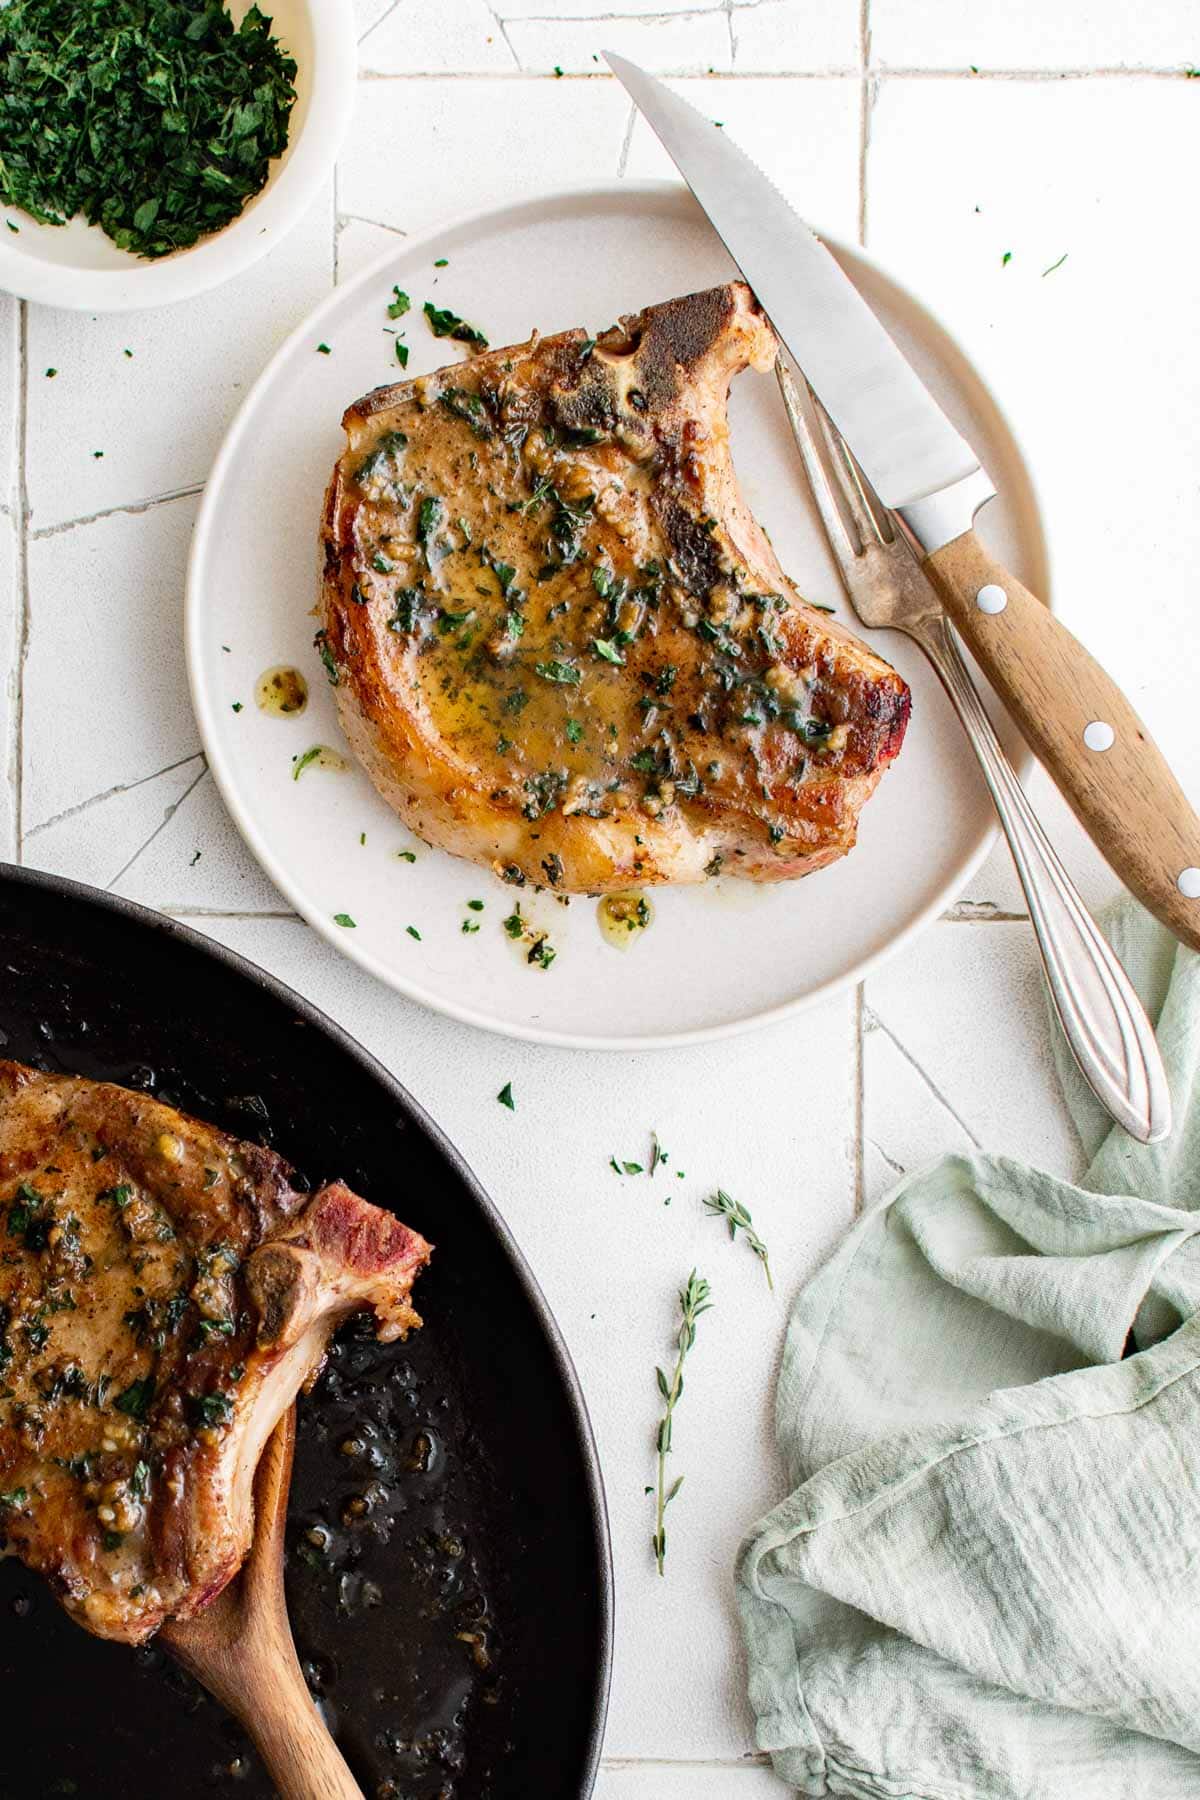 Pork chops with parsley and butter on a plate and in a skillet